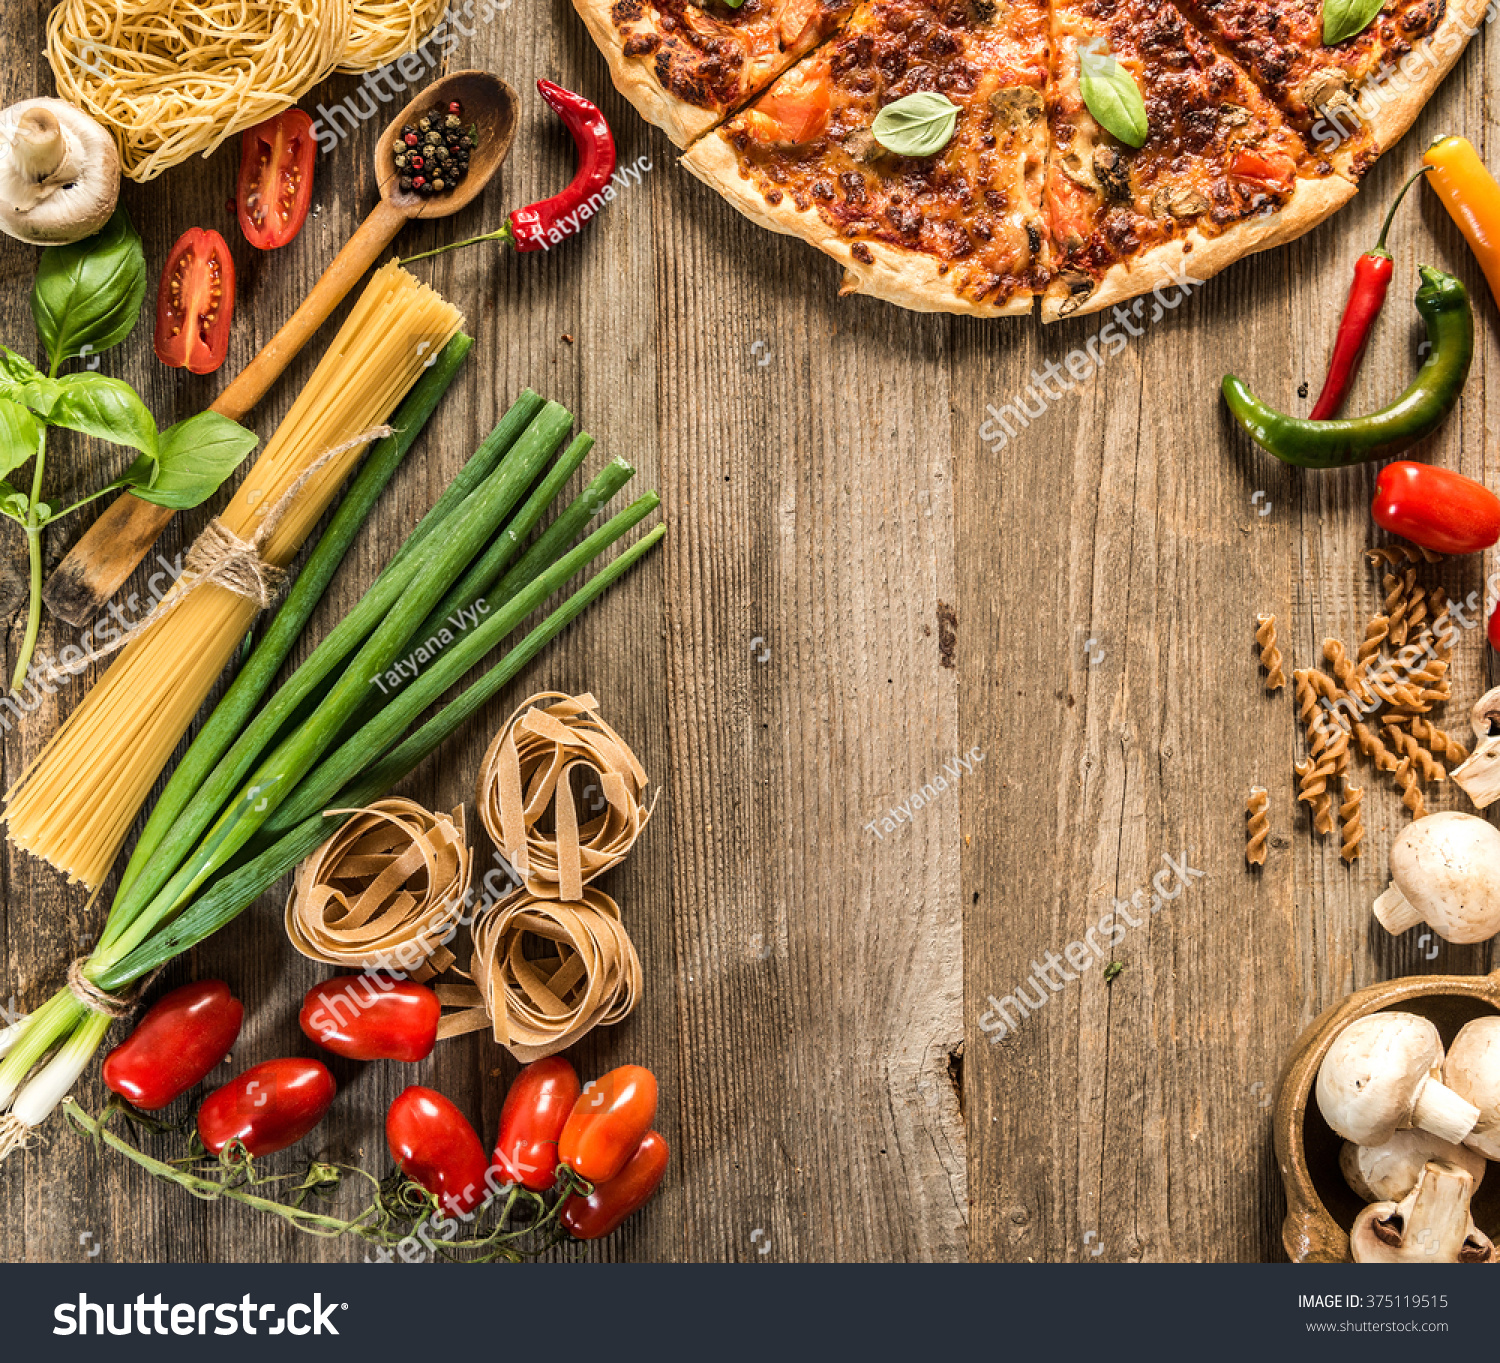 Royalty-free Italian food background with pizza, raw… #375119515 ...